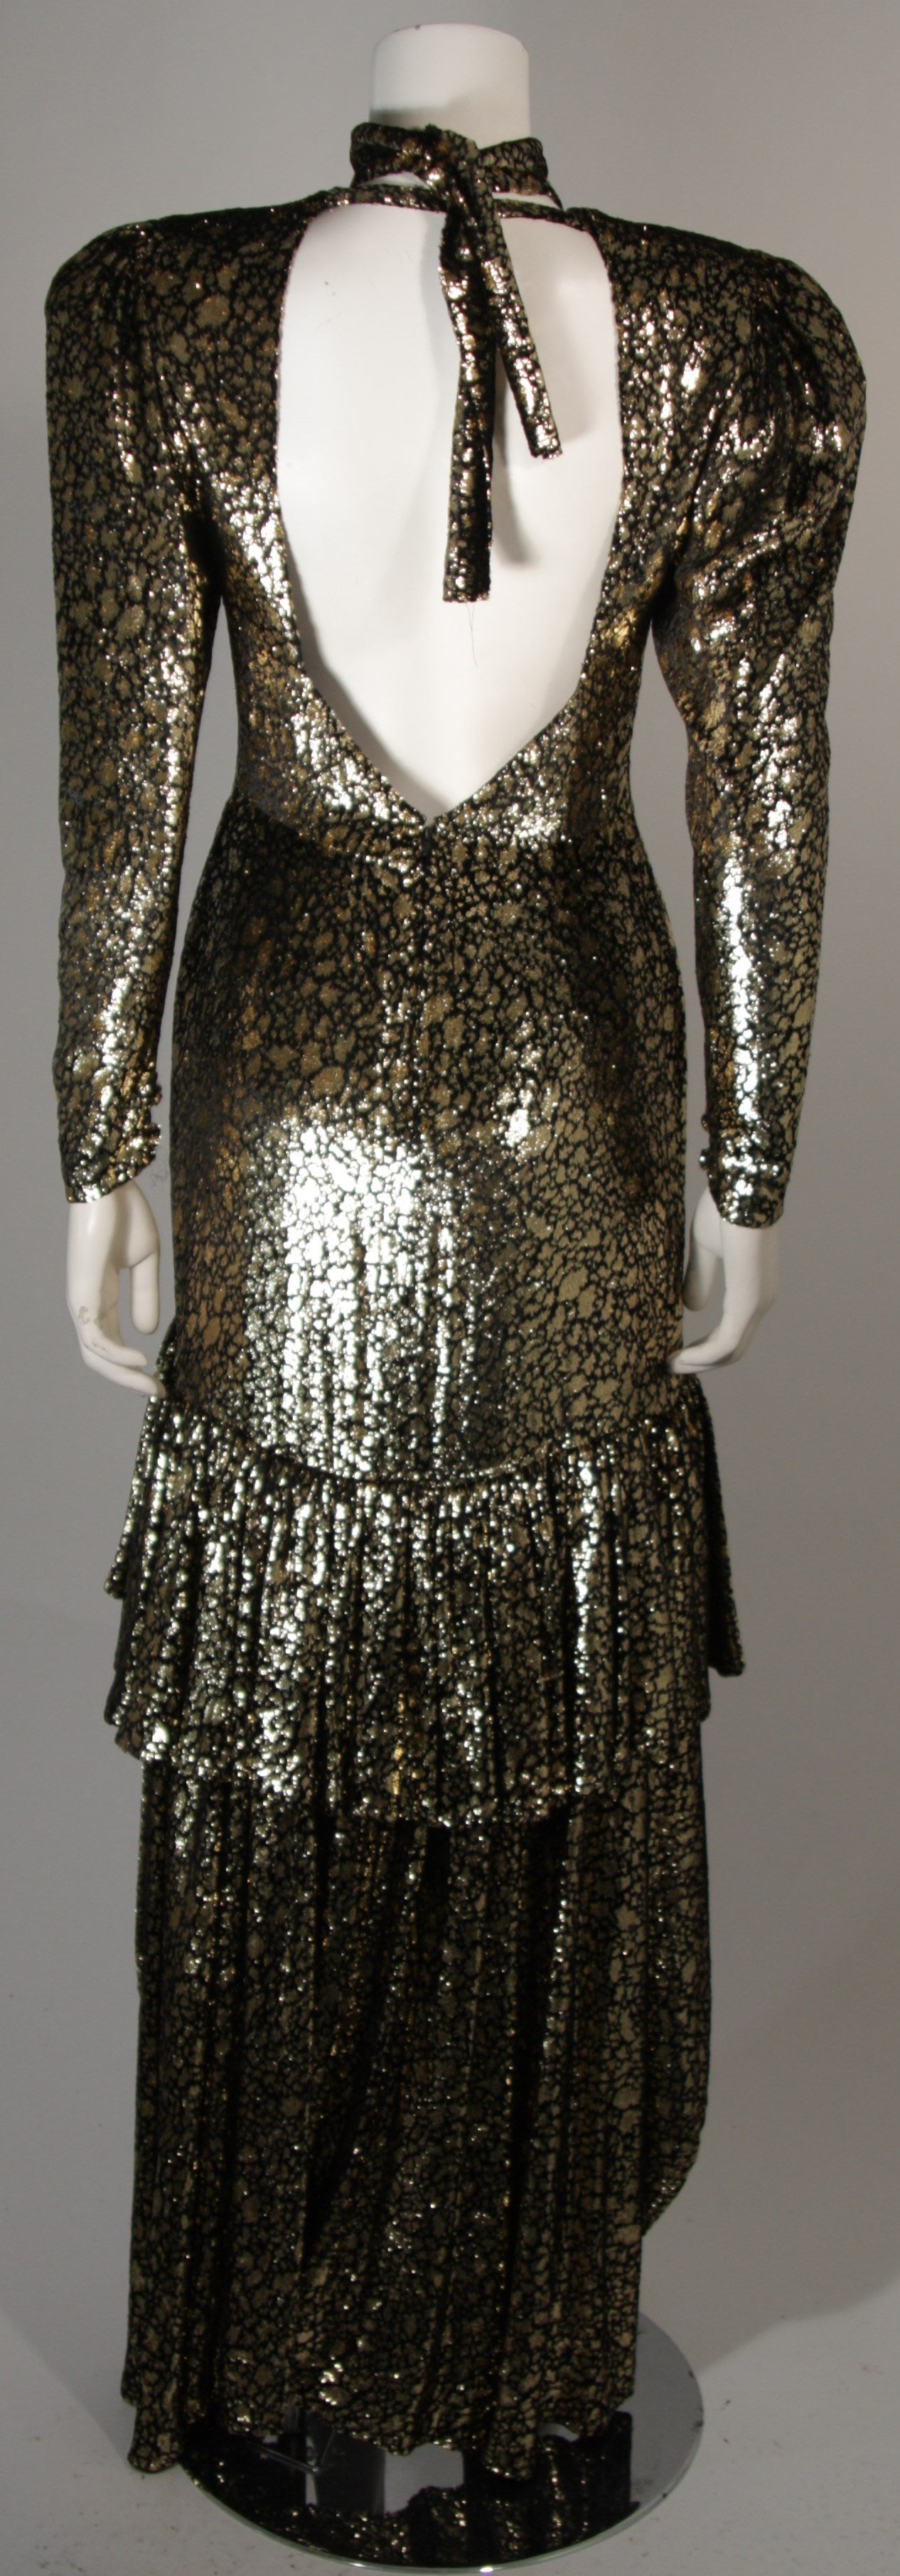 Sonia Rykiel Black and Gold Metallic Accented Tiered Gown Size Small For Sale 2